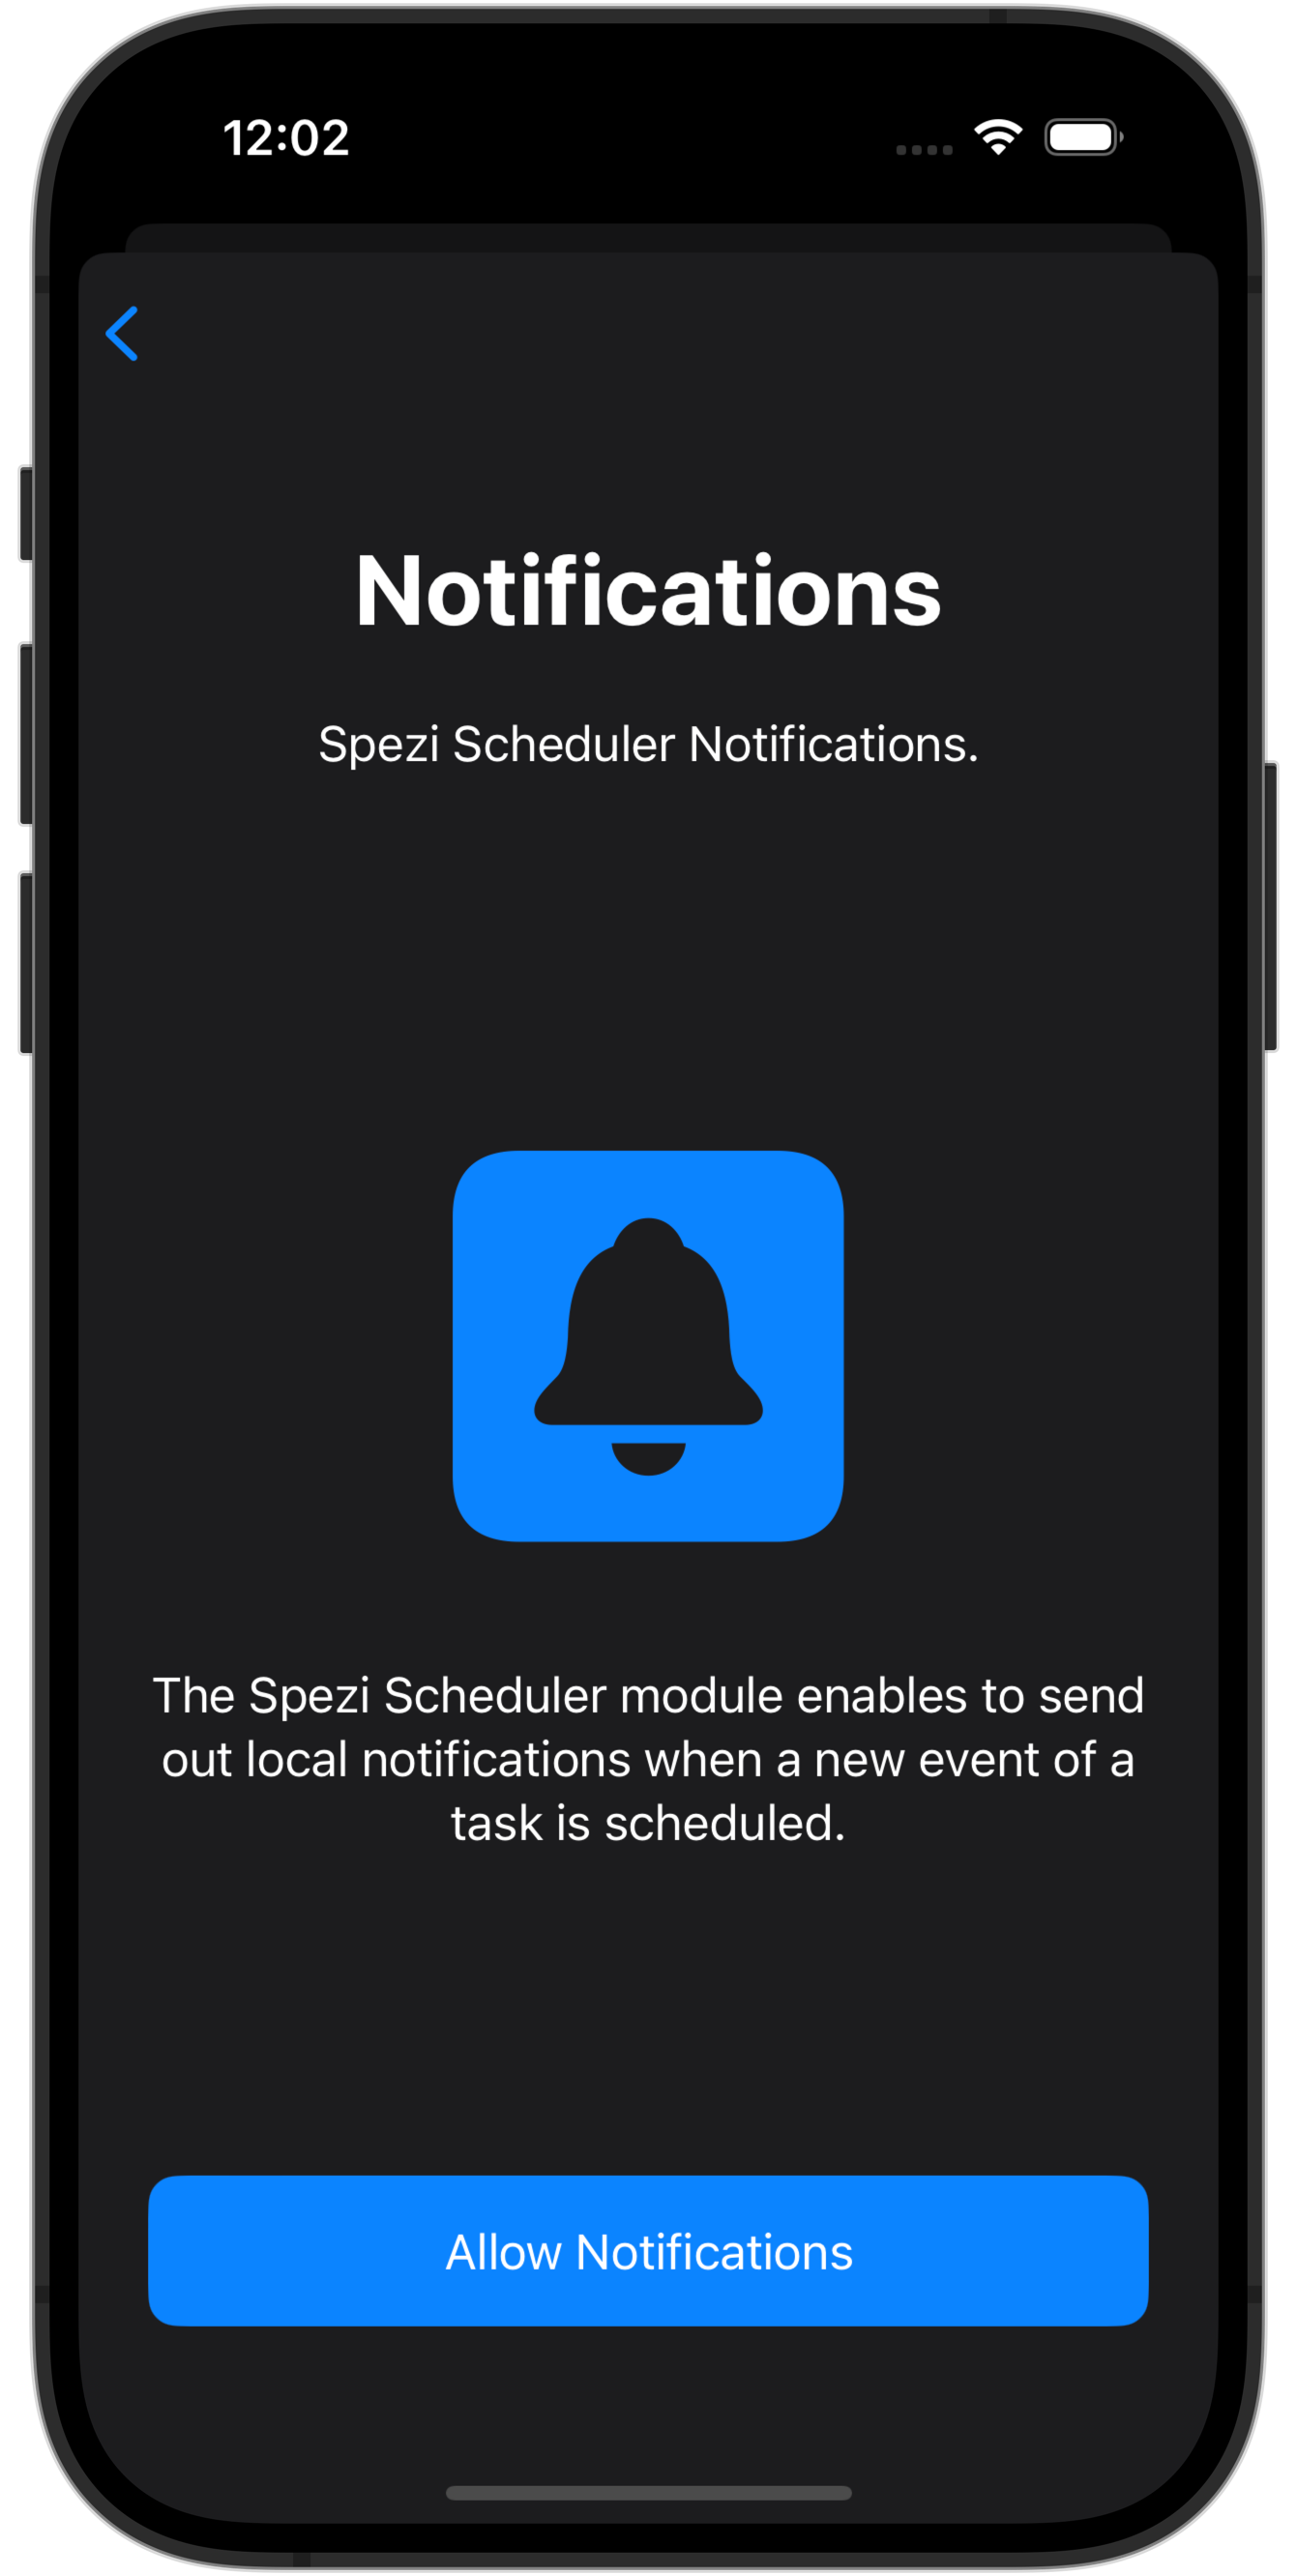 Onboarding screen showing the Notifications permission screen.